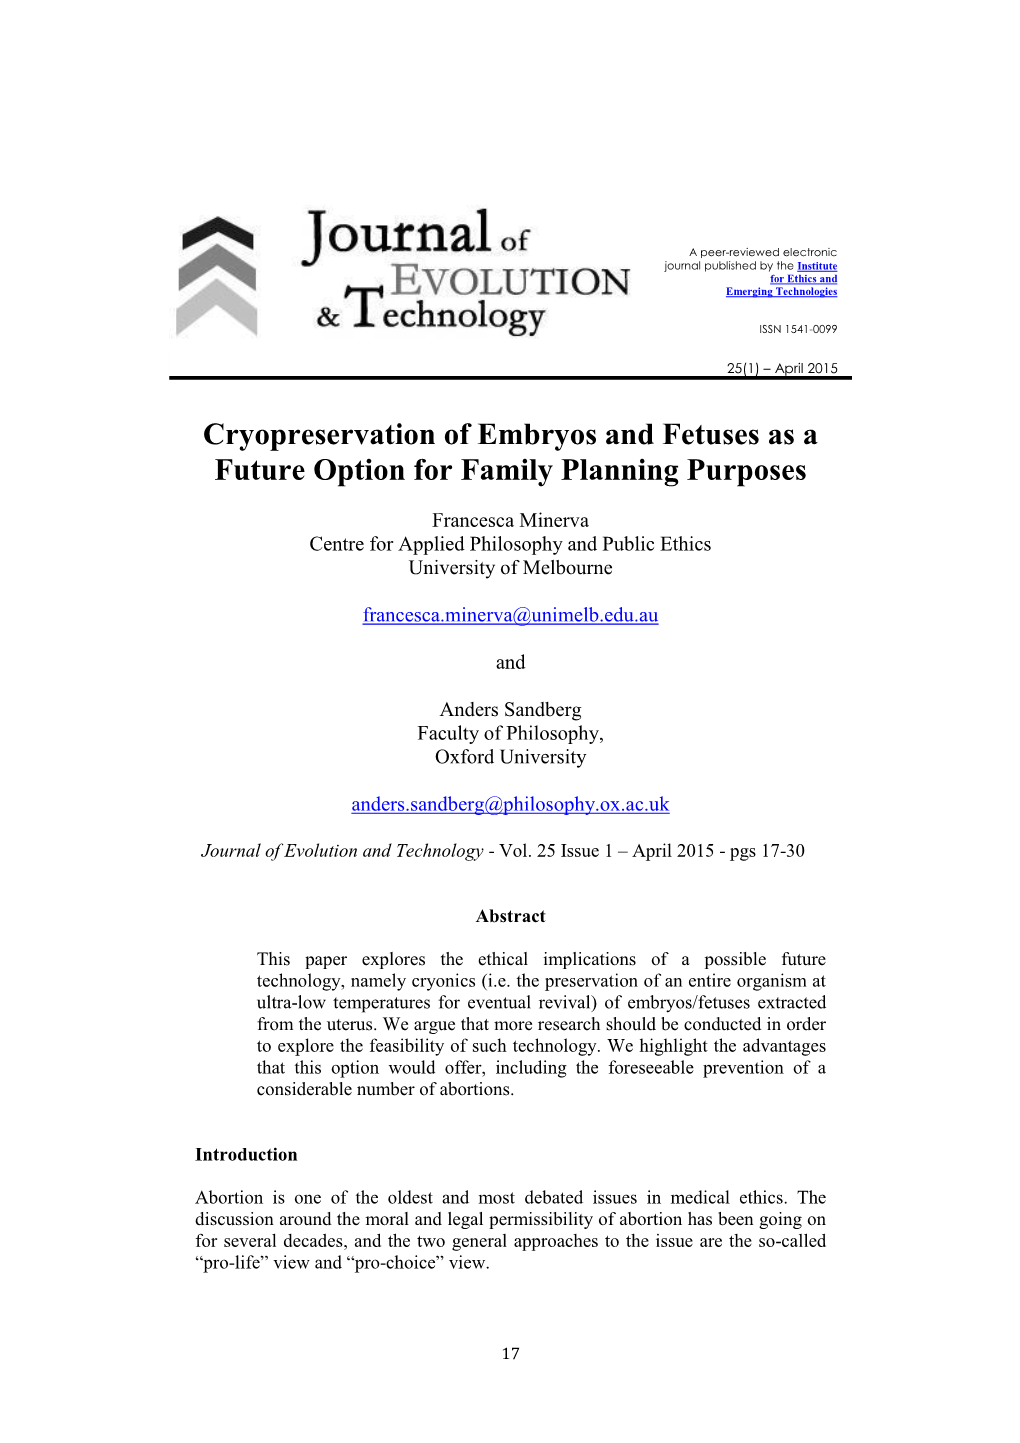 Cryopreservation of Embryos and Fetuses As a Future Option for Family Planning Purposes